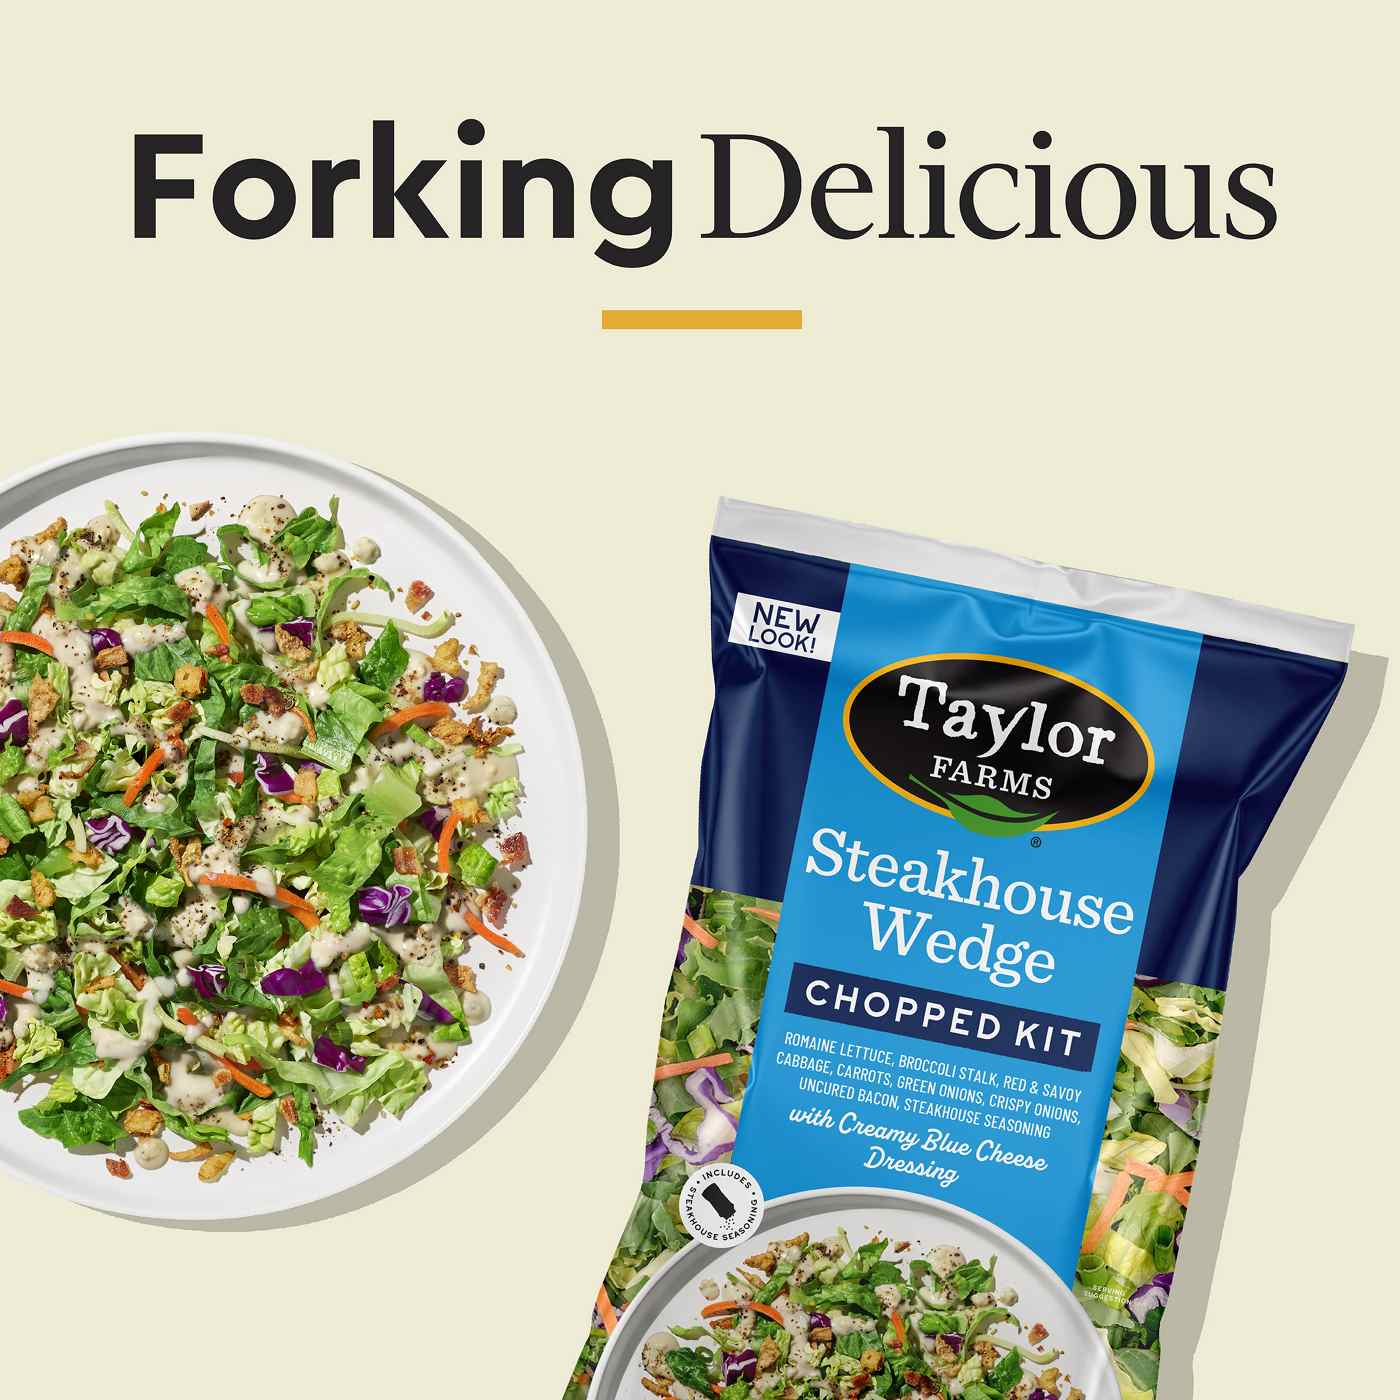 Taylor Farms Chopped Salad Kit - Steakhouse Wedge; image 4 of 6